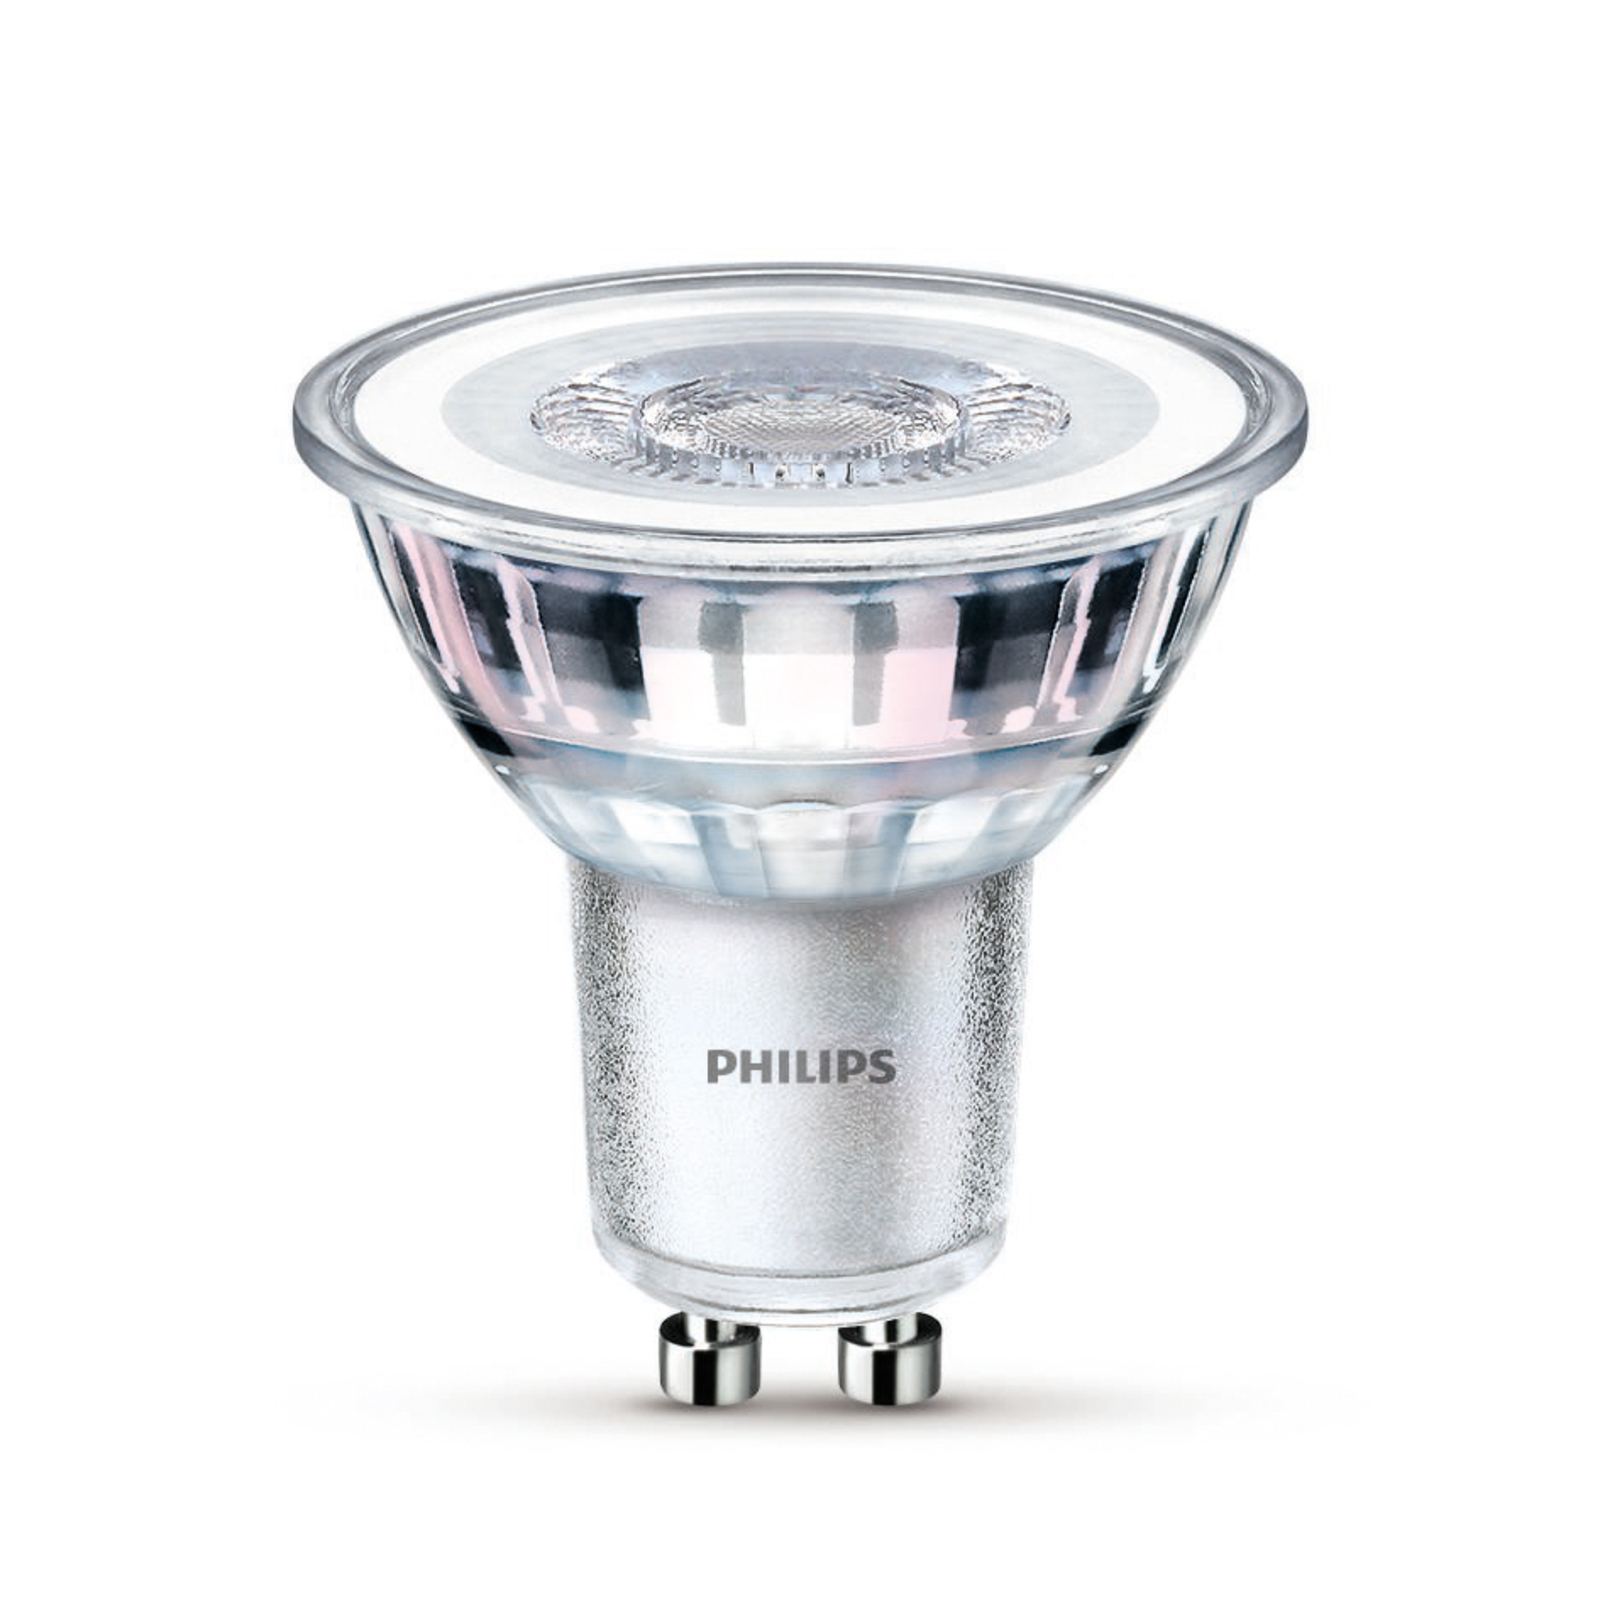 Philips LED GU10 3,5 W 255lm 827 claire 36° x3